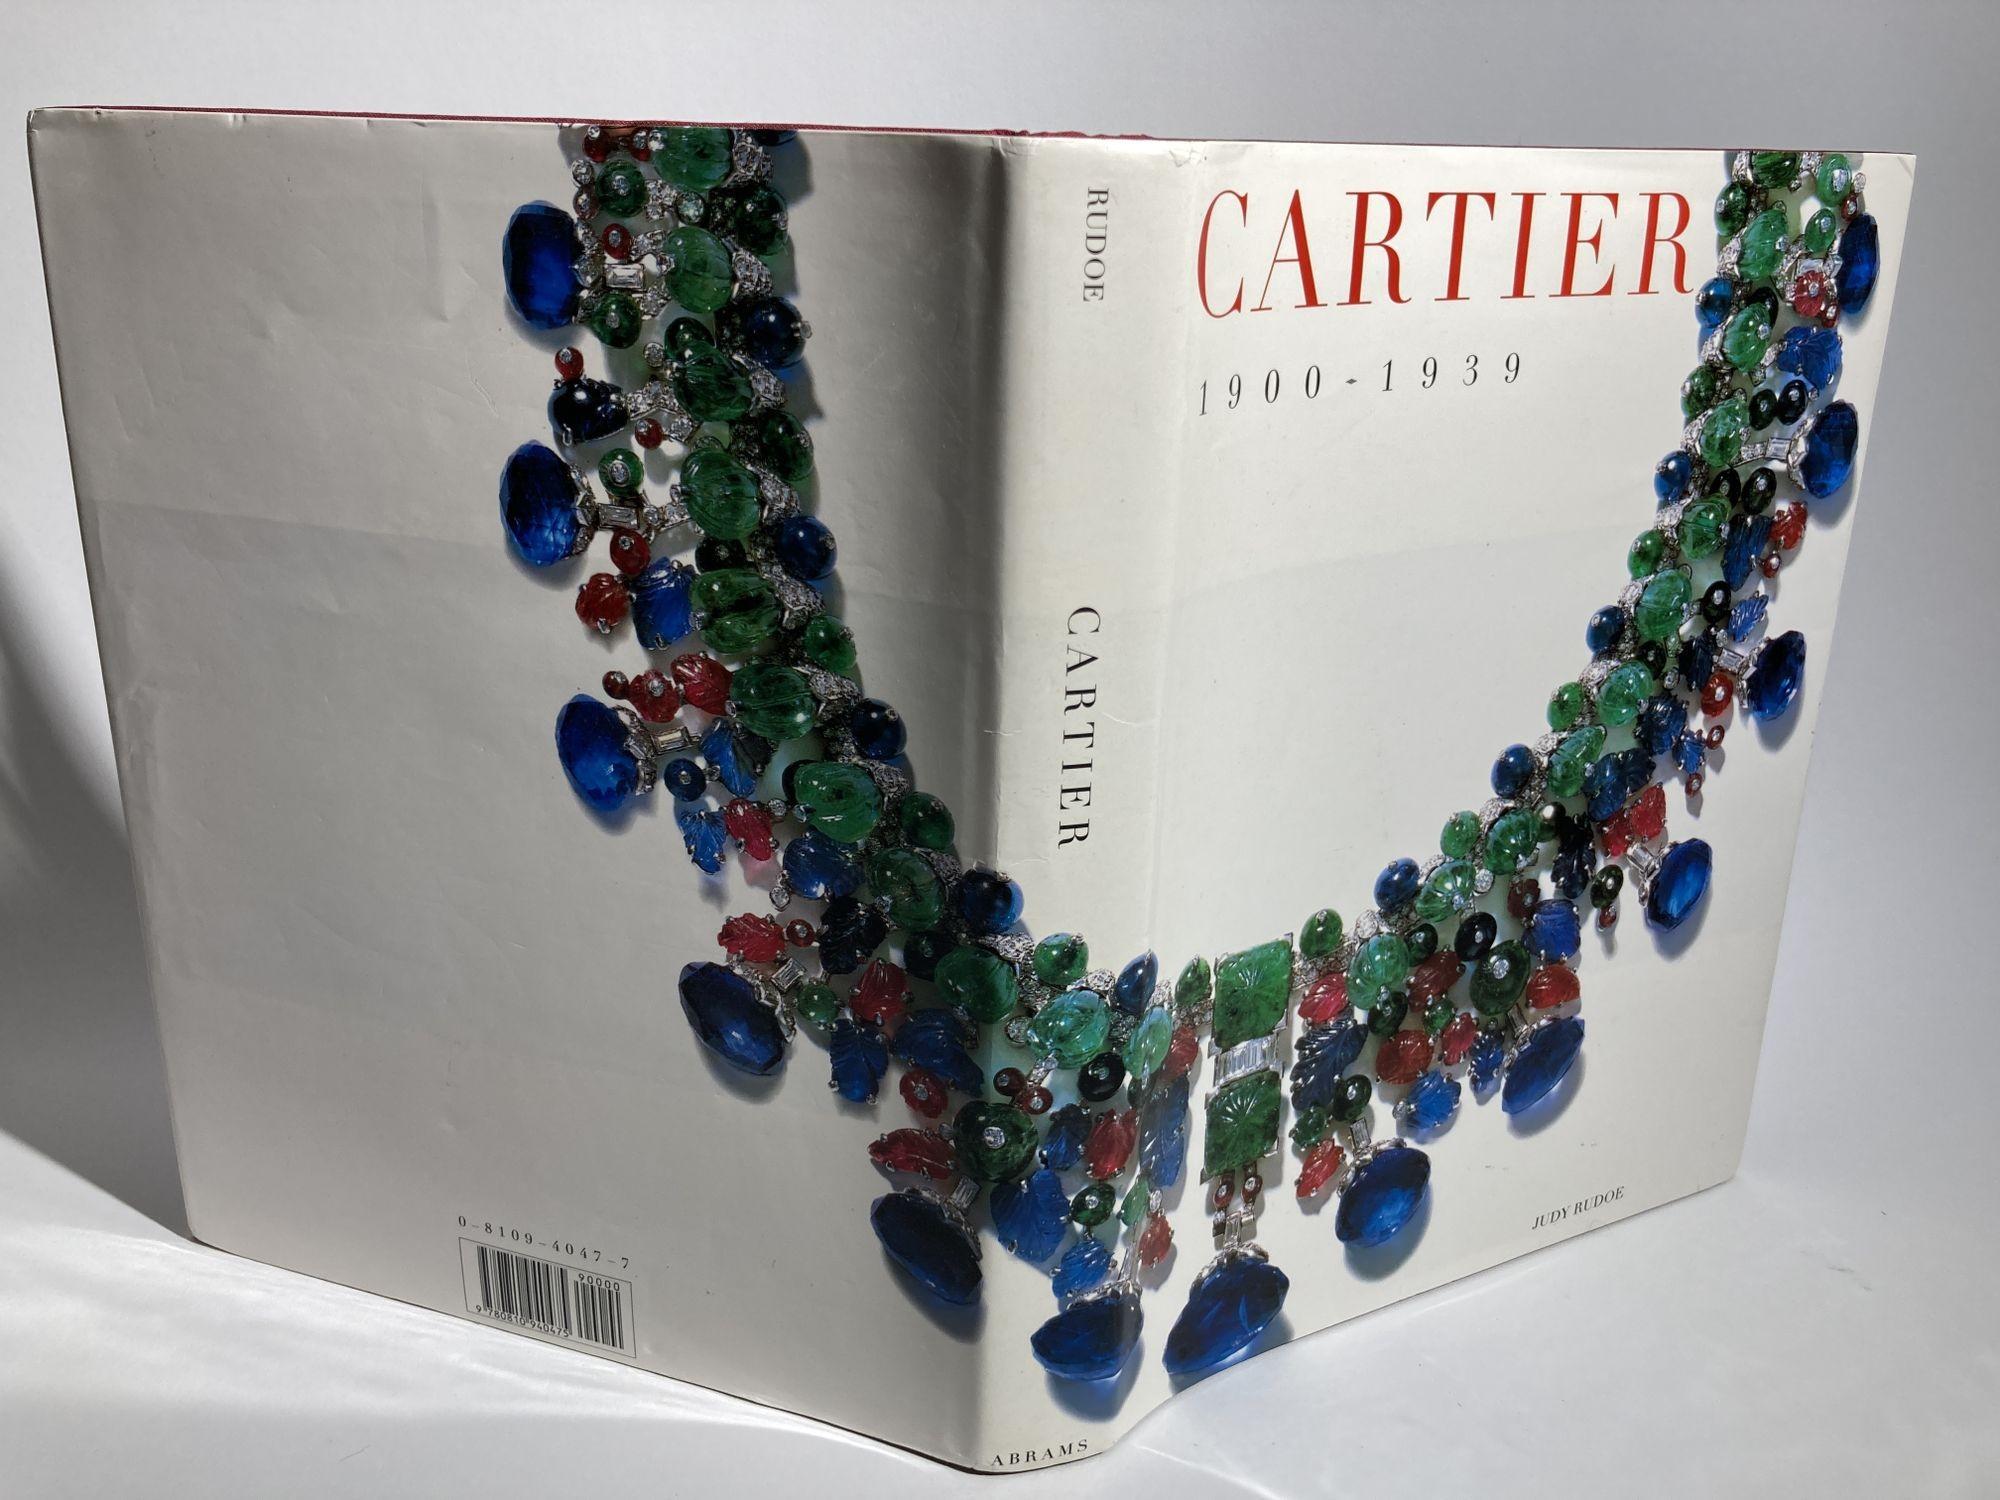 Cartier 1900 to 1939 Hardcover Book 12